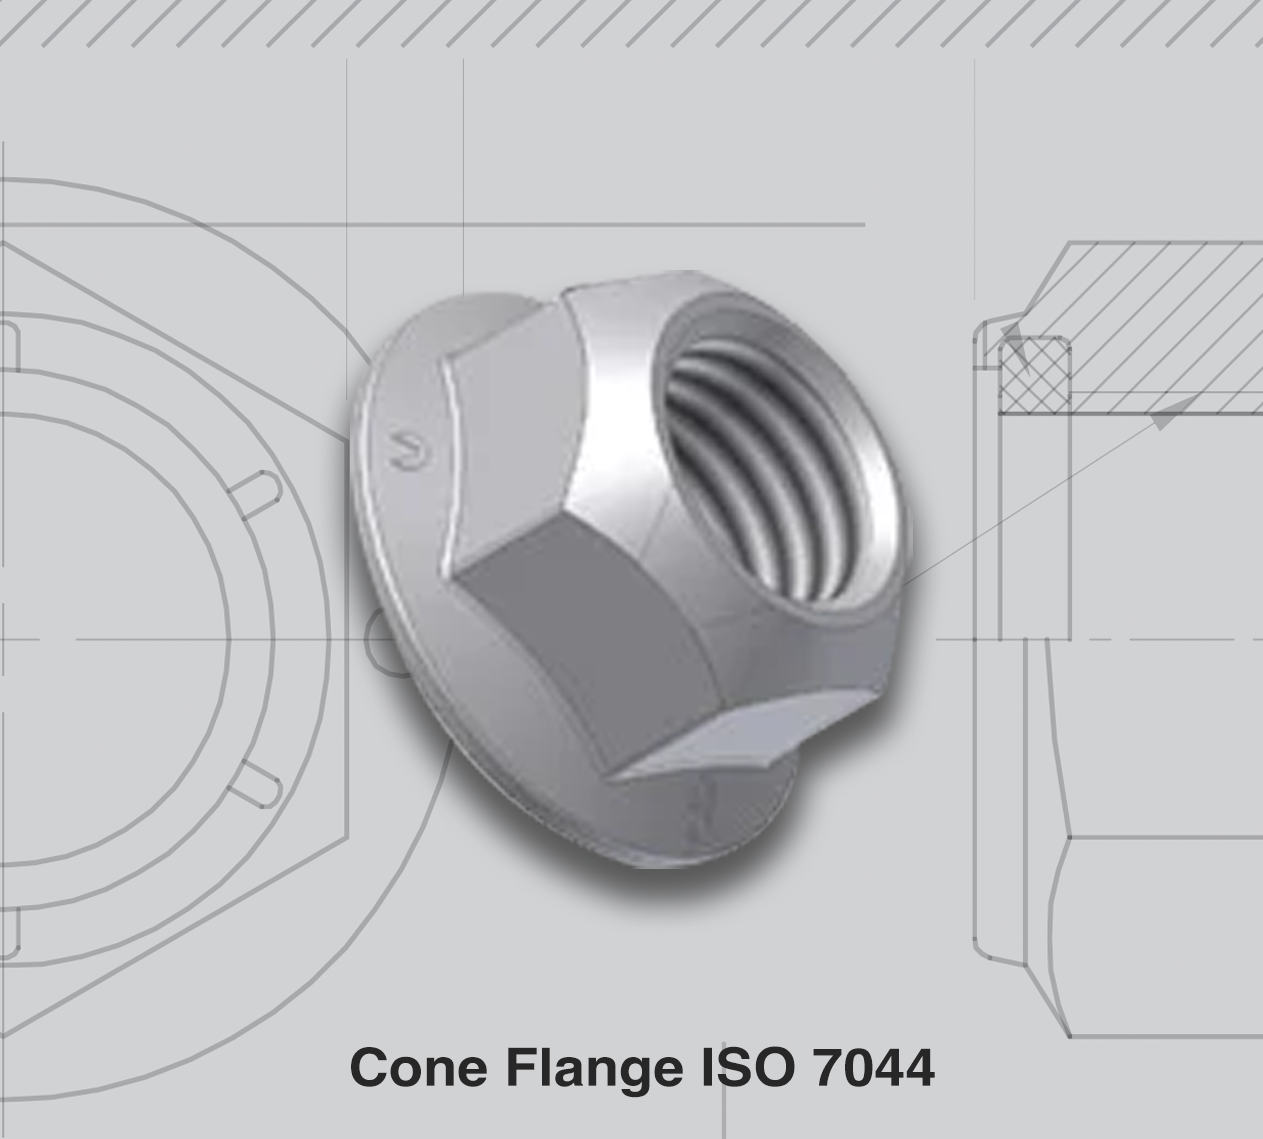 Cone Flange ISO 7044